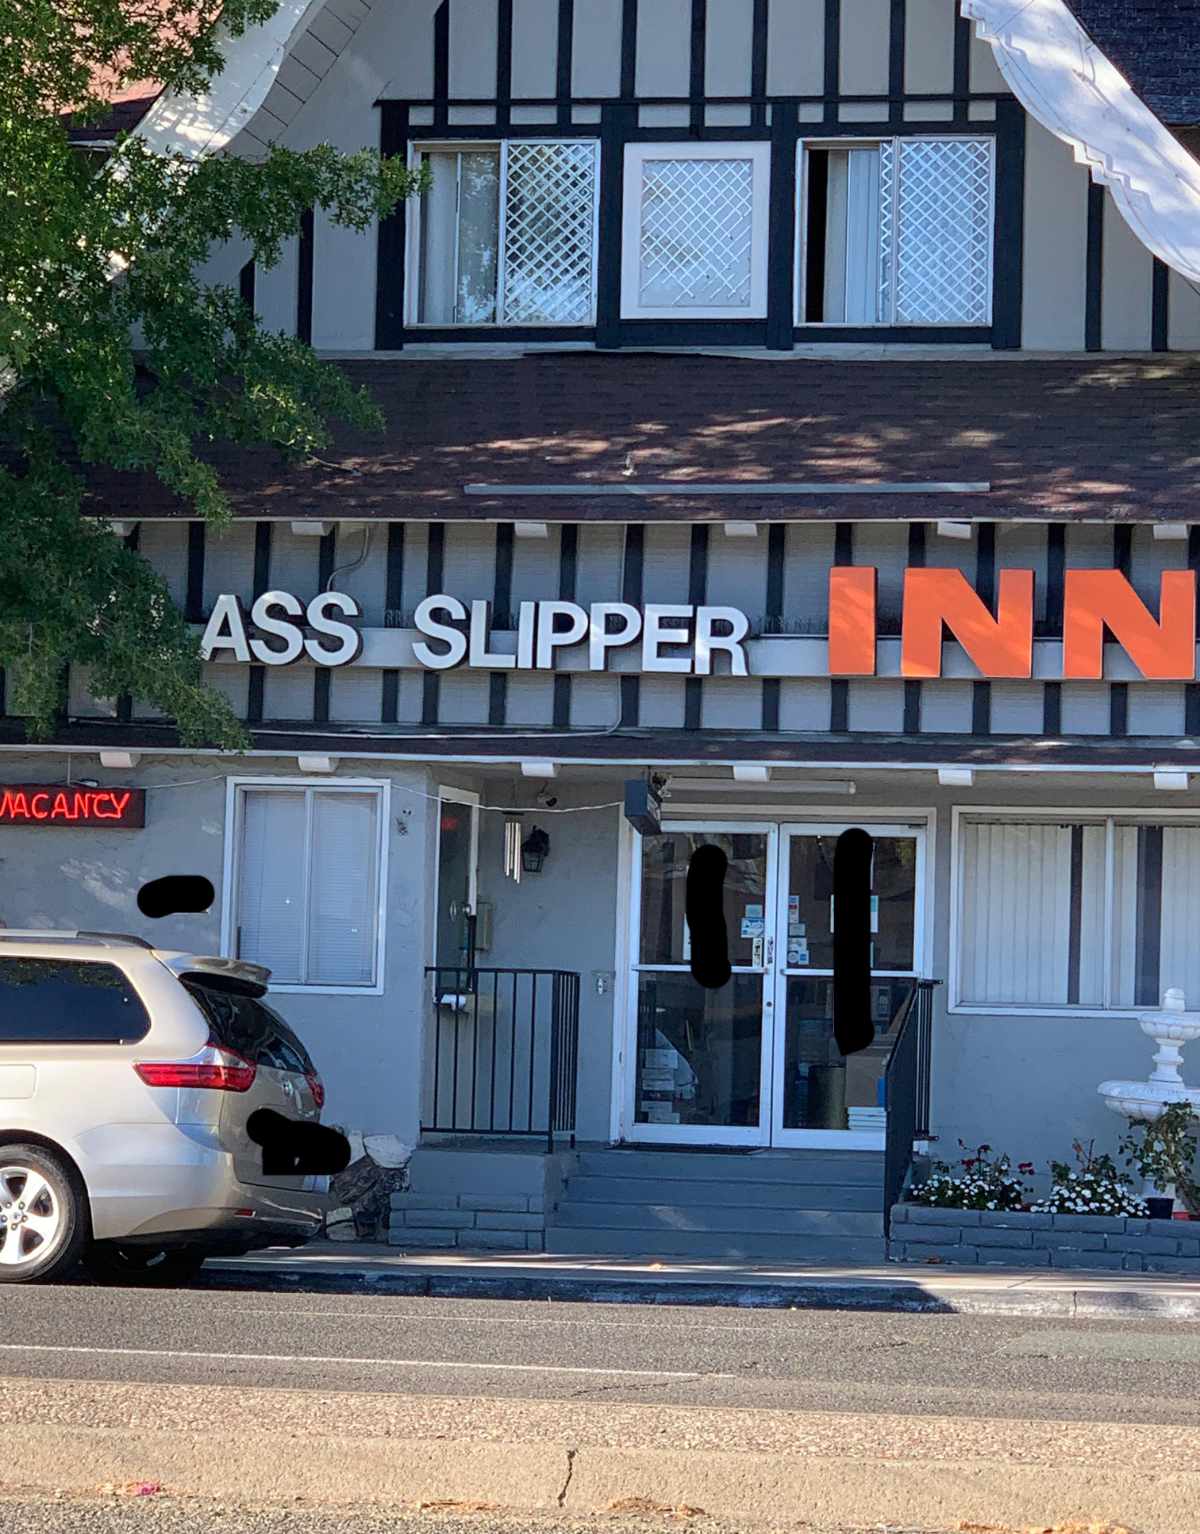 Think I’ll pass on staying here